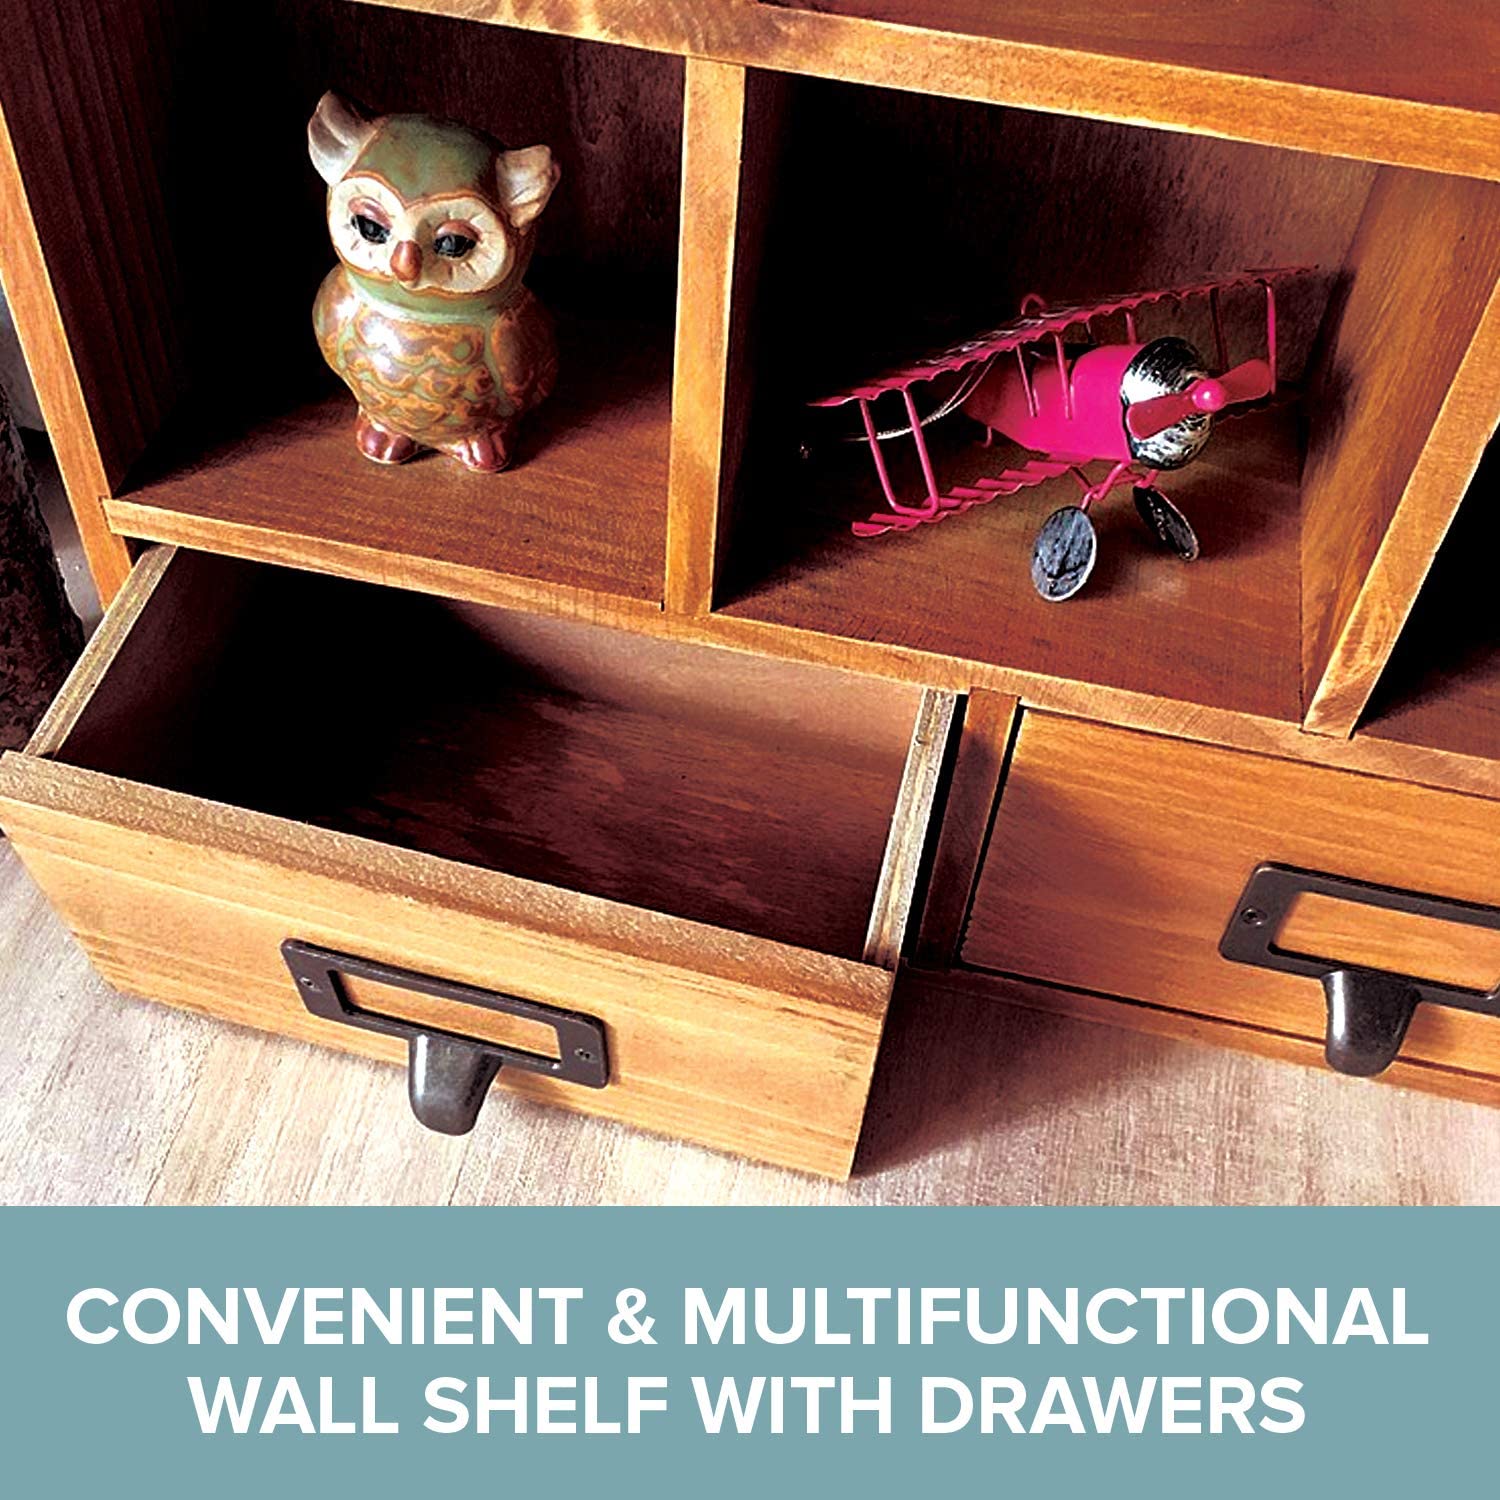 Wall Mount Wood Cabinet Top Cubbies